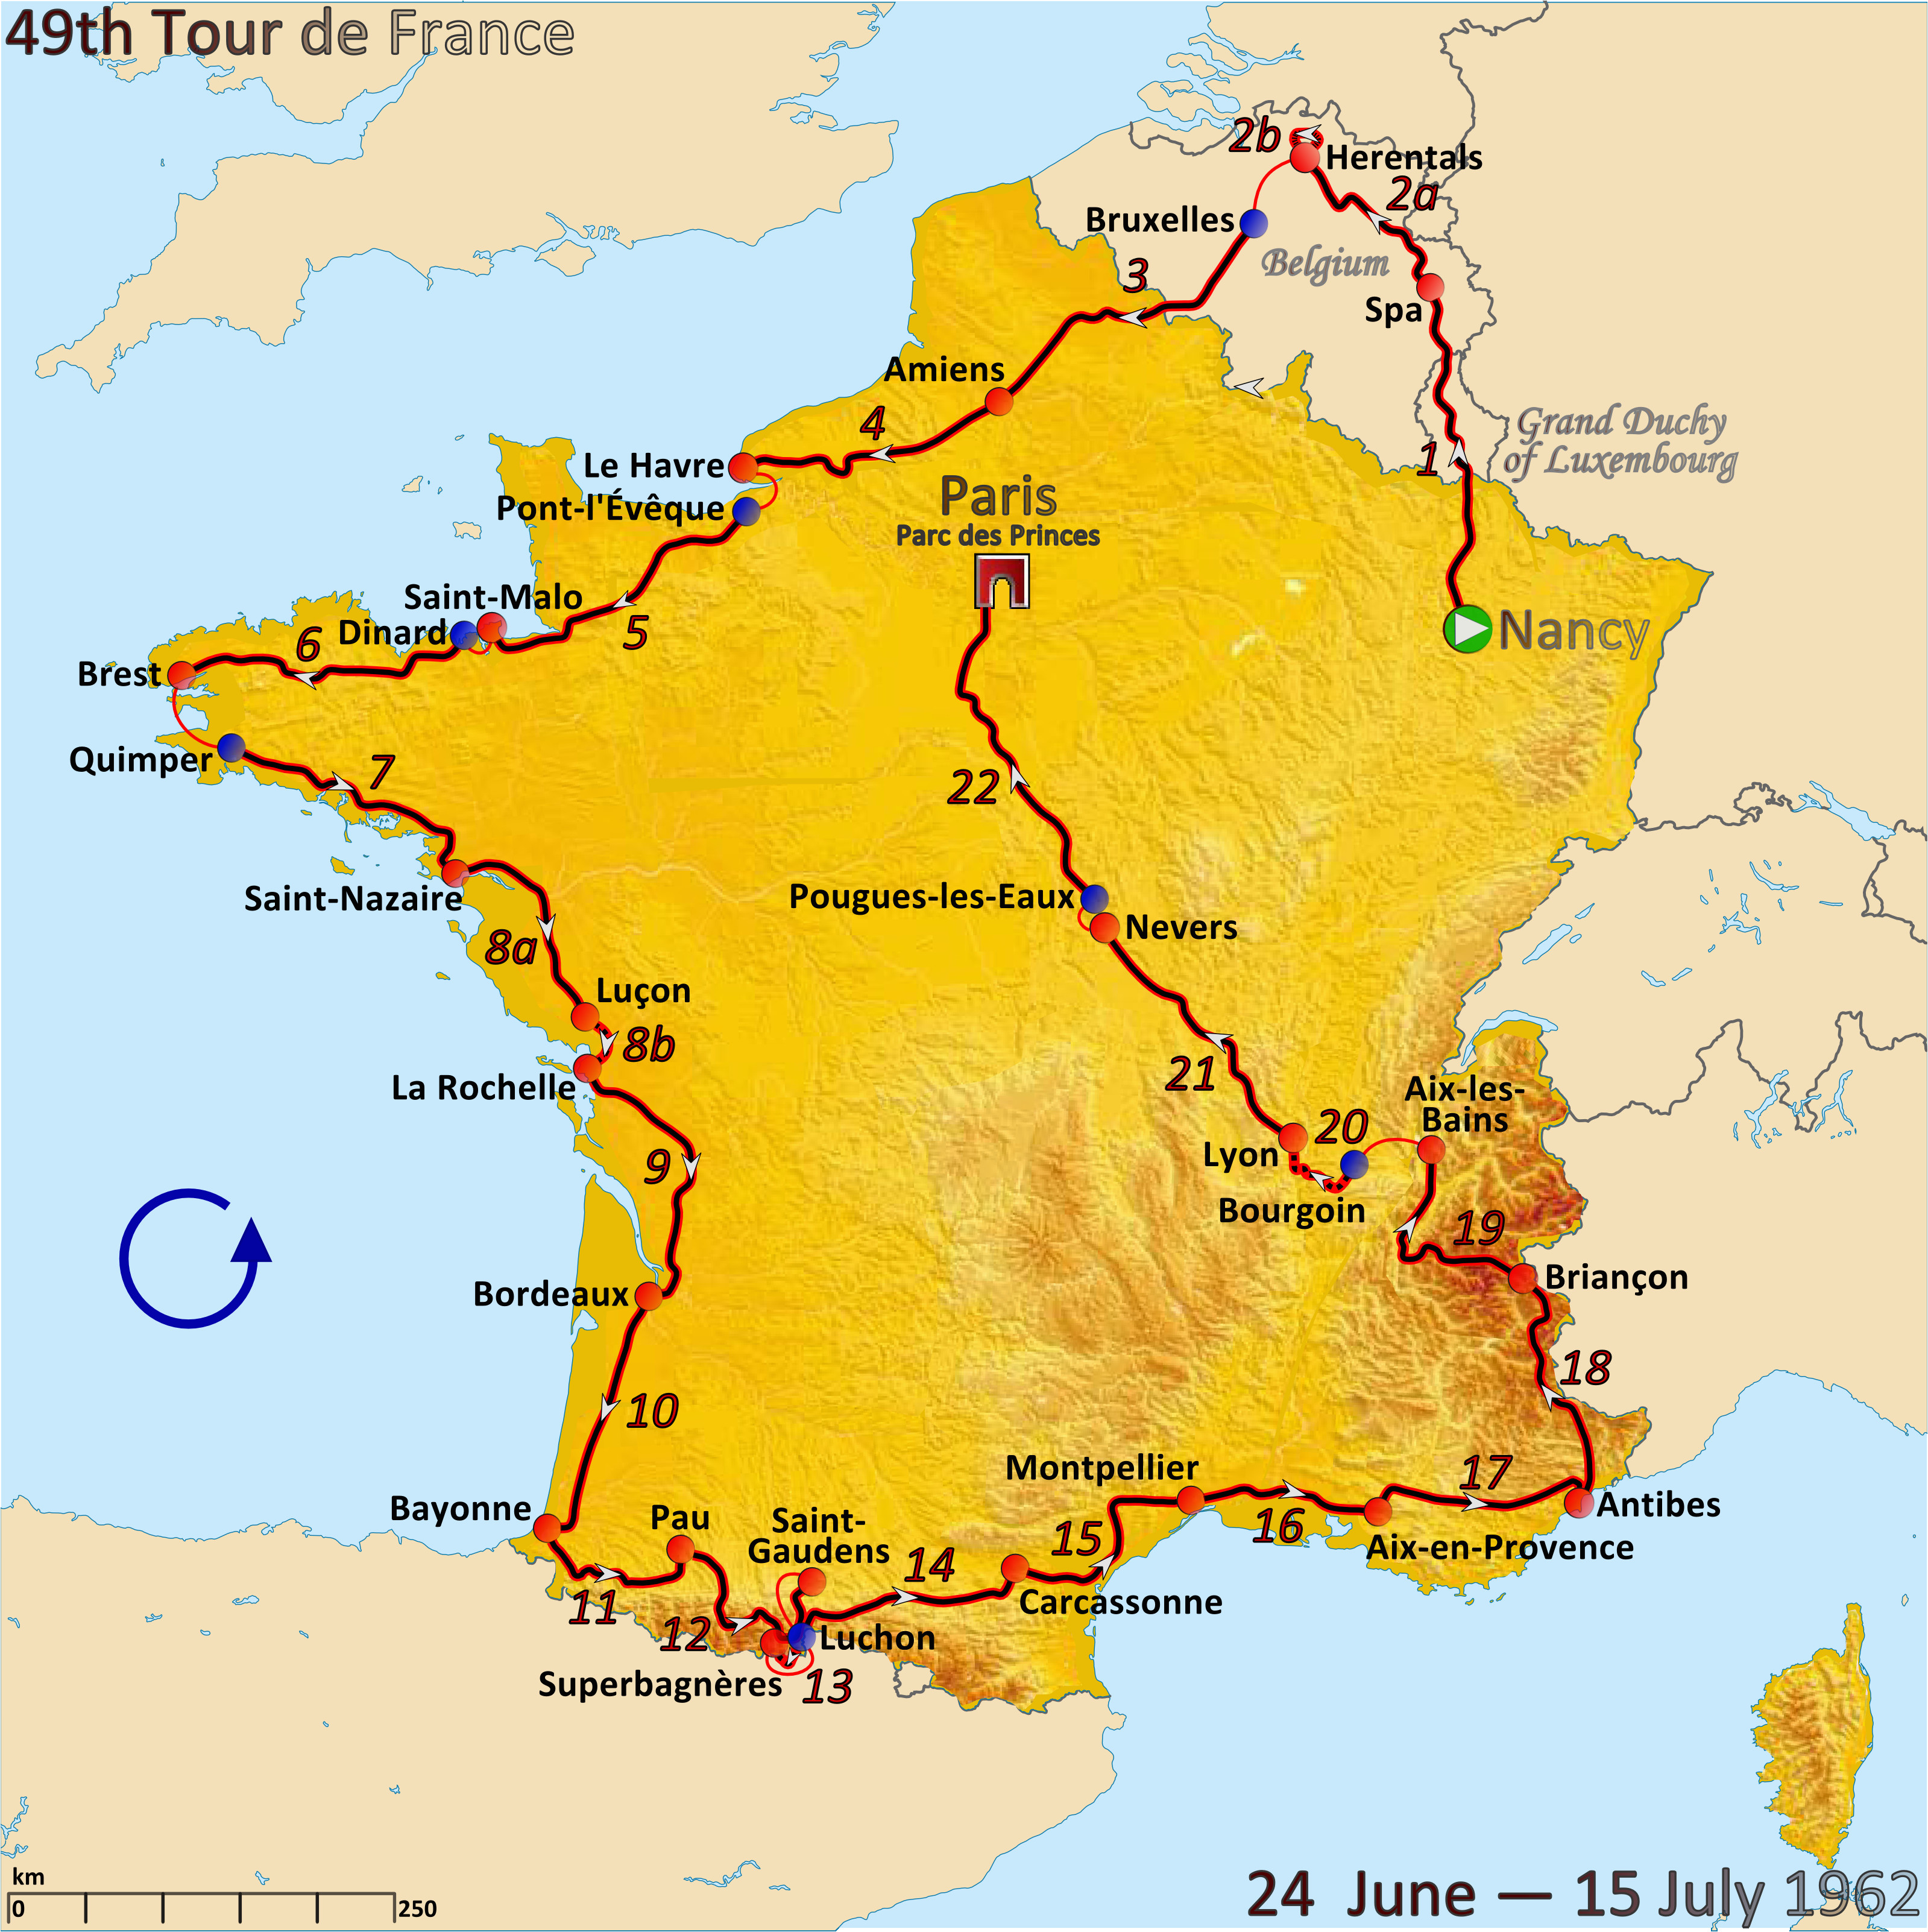 first stage of the tour de france